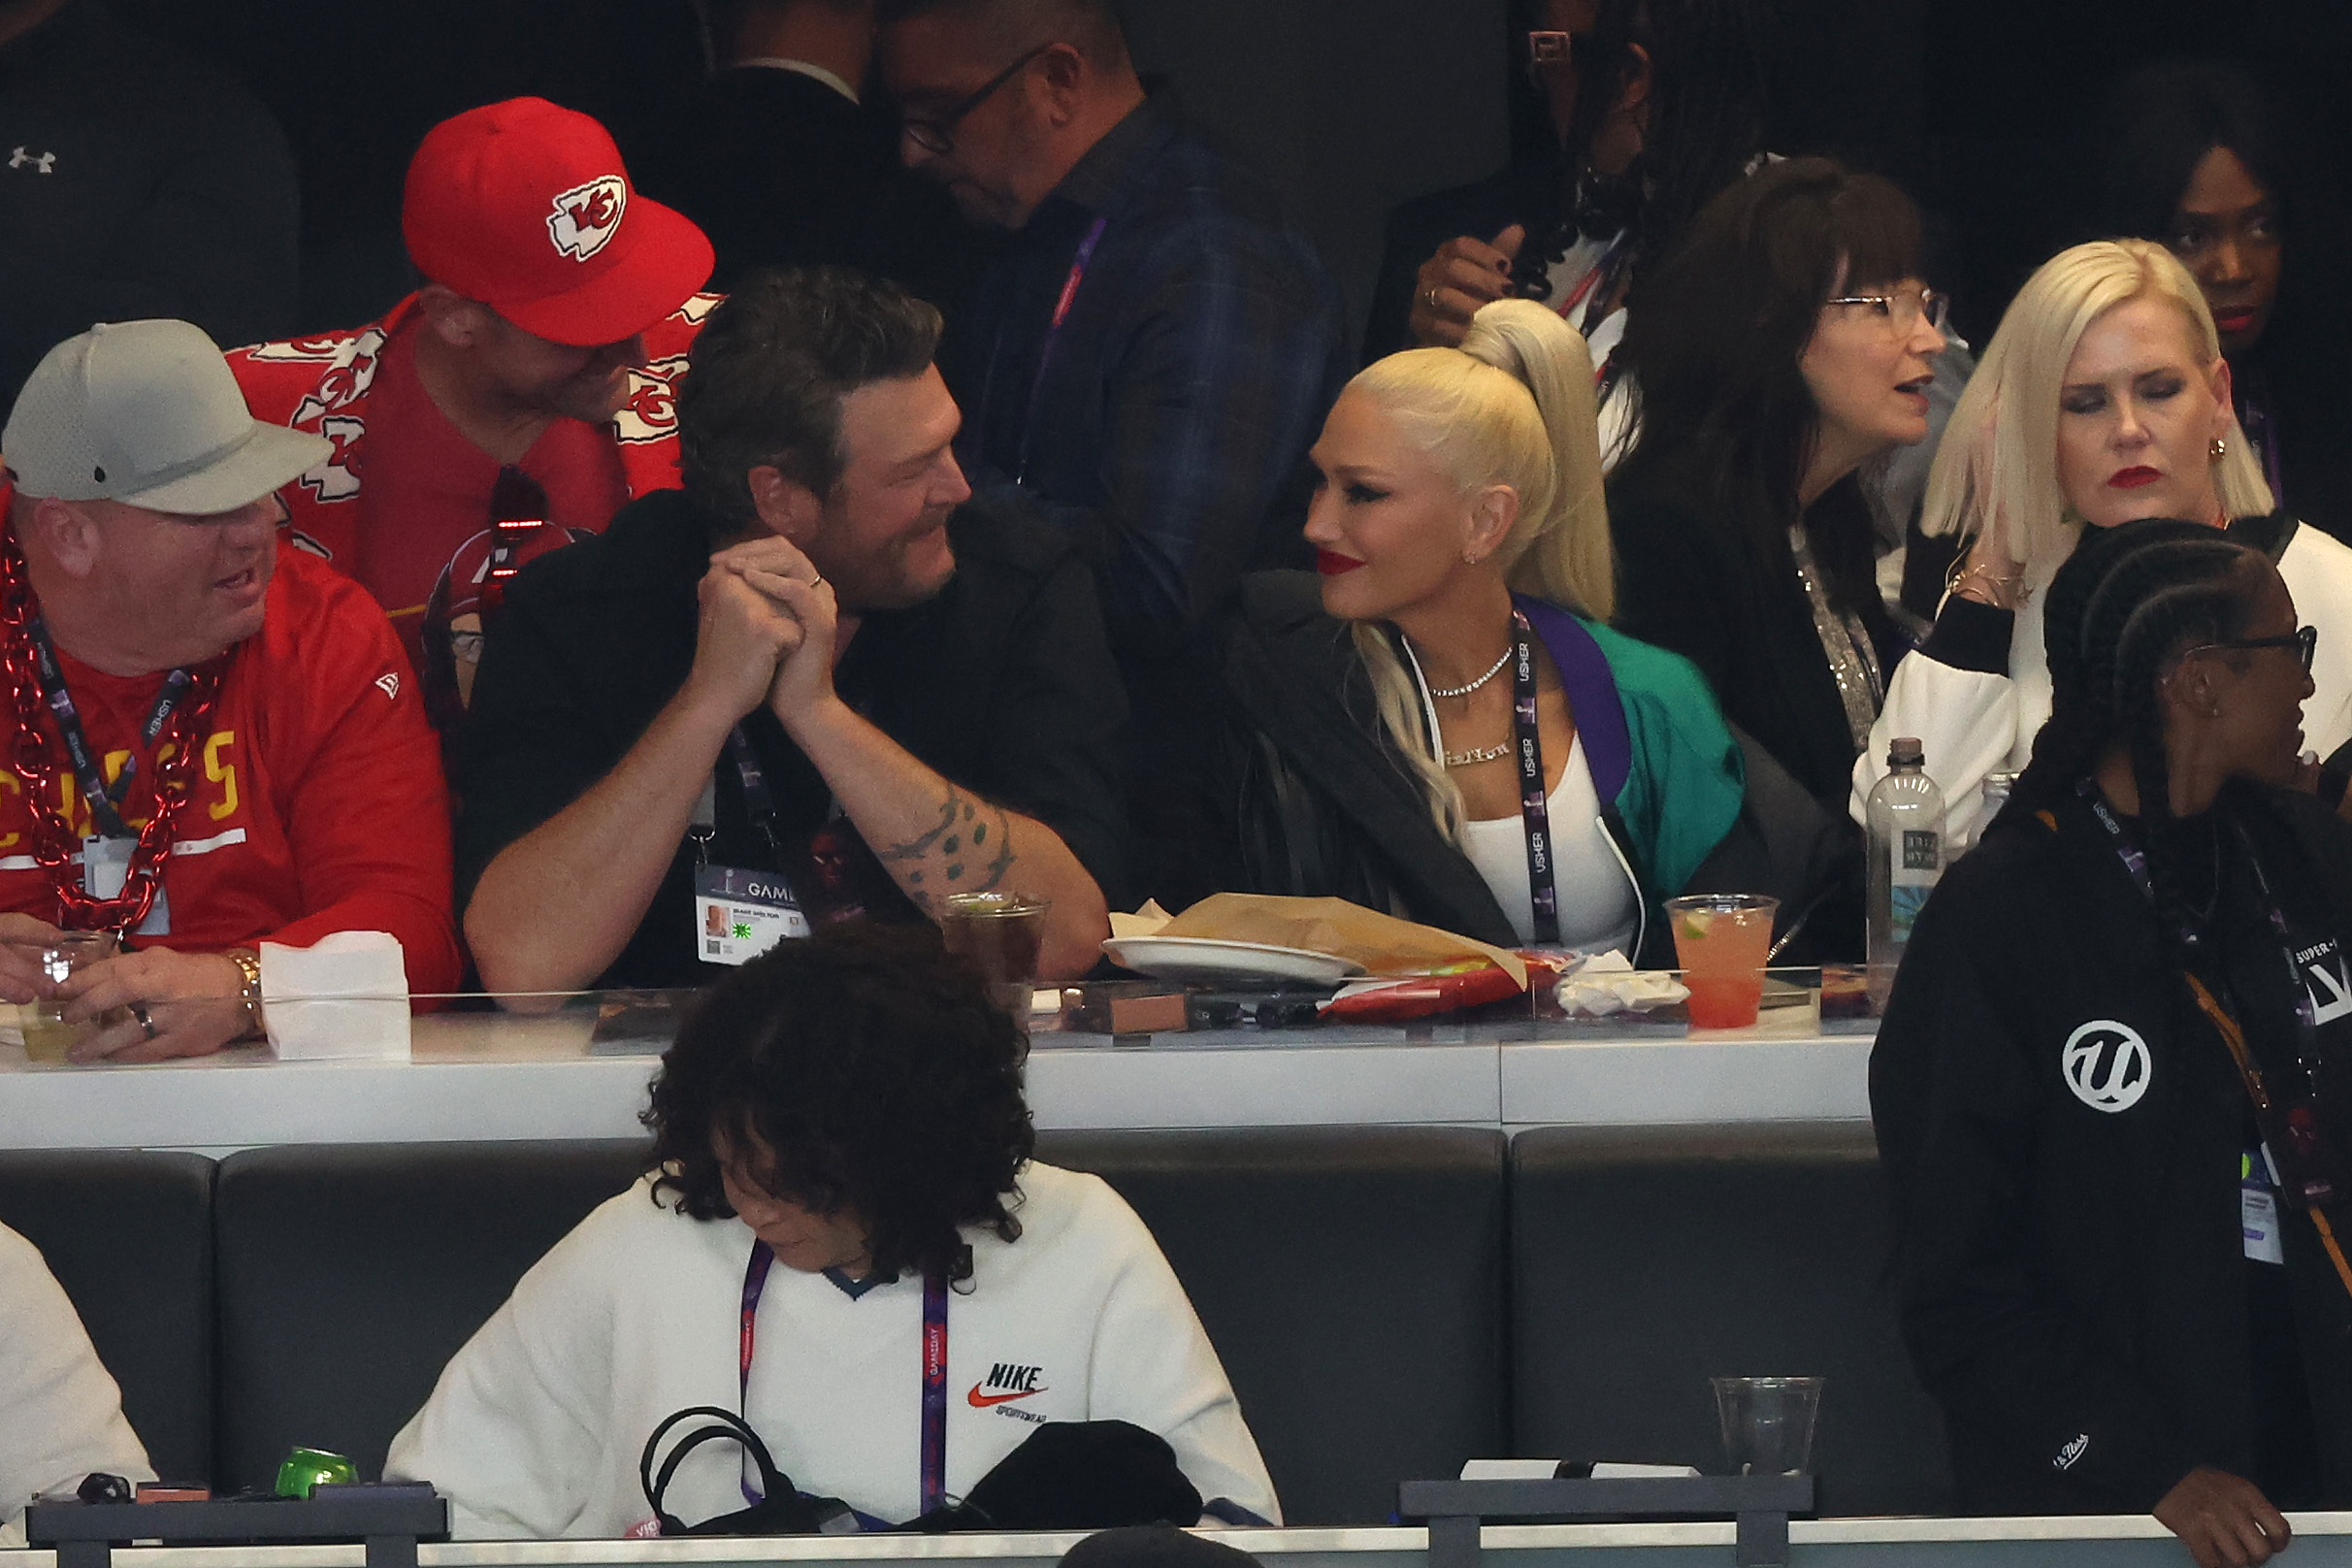 As of late, Gwen and Blake have been rumored to be having marital woes